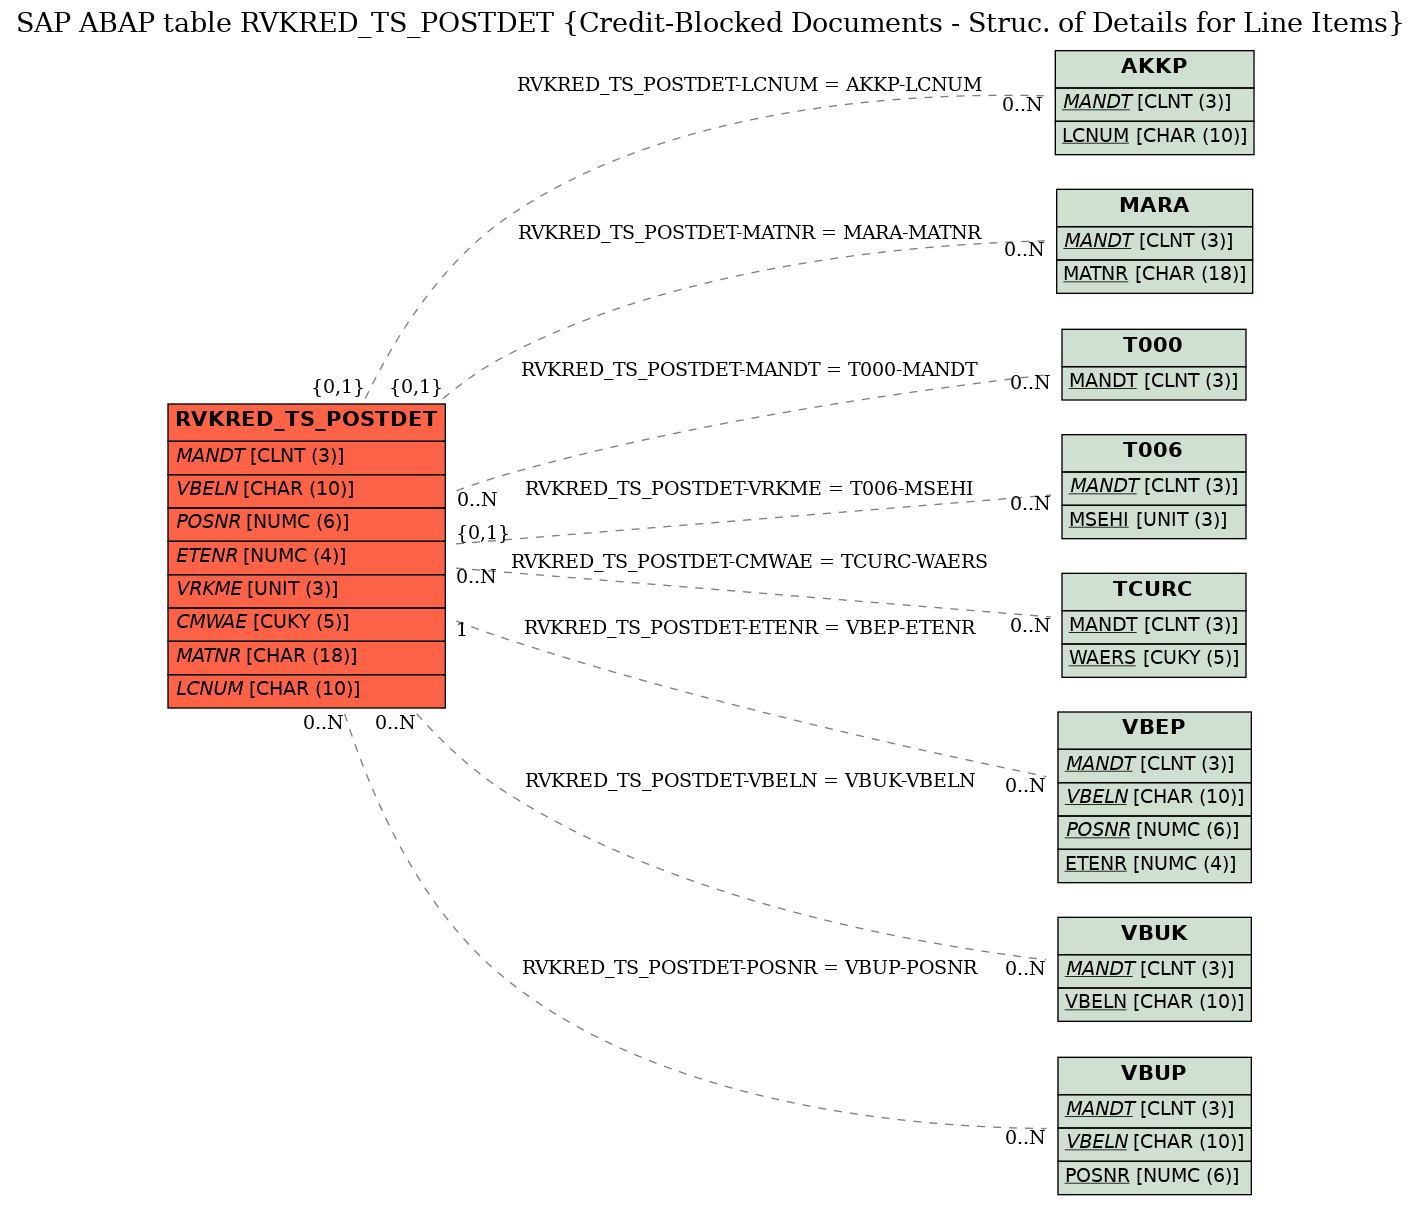 E-R Diagram for table RVKRED_TS_POSTDET (Credit-Blocked Documents - Struc. of Details for Line Items)